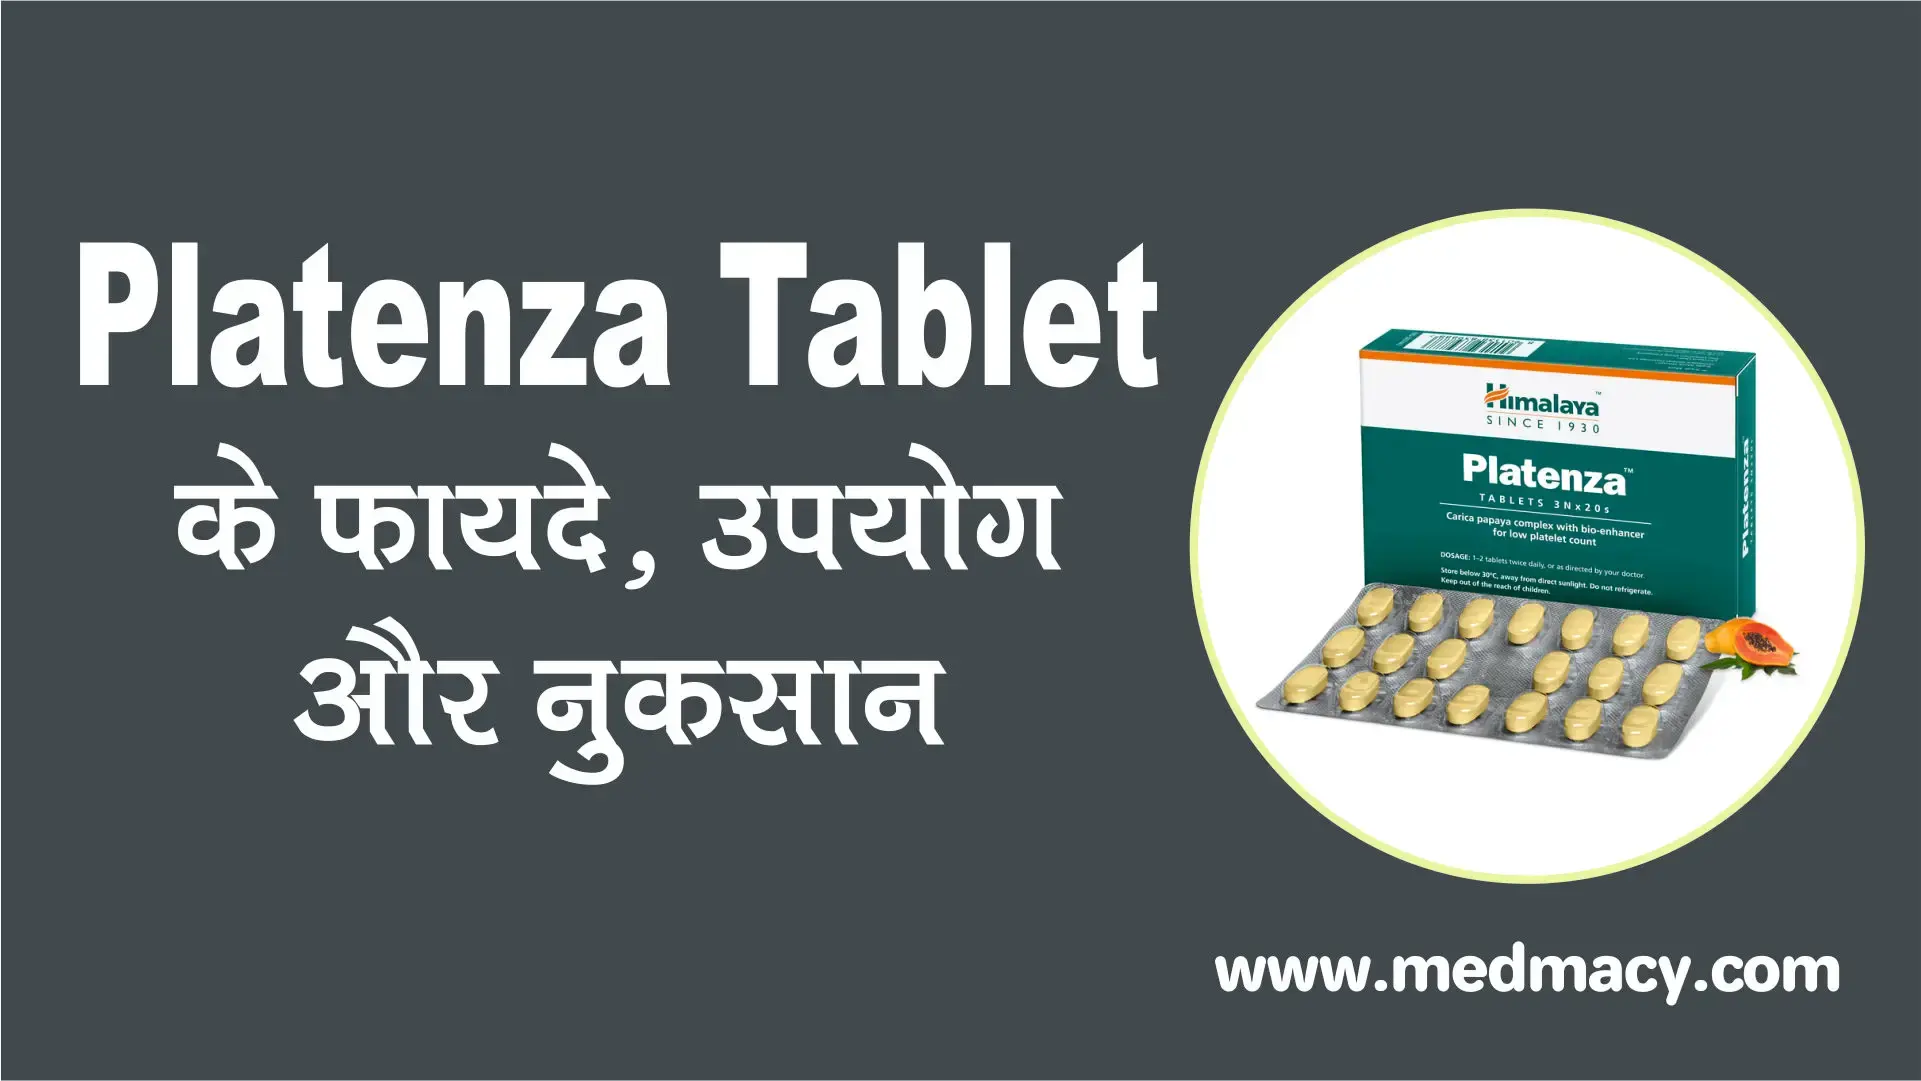 Platenza Tablet uses in Hindi